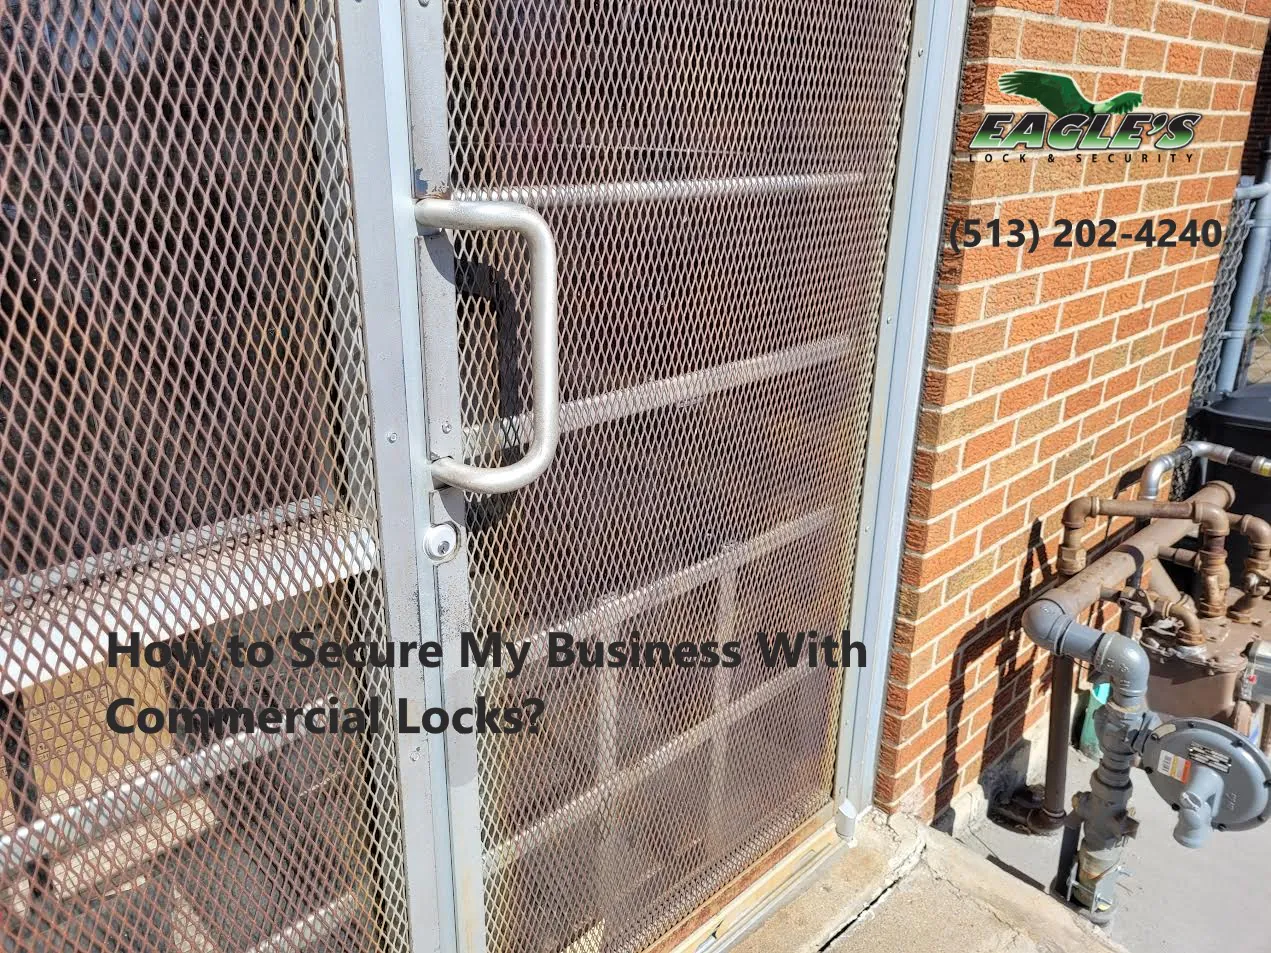 How to Secure My Business With Commercial Locks?